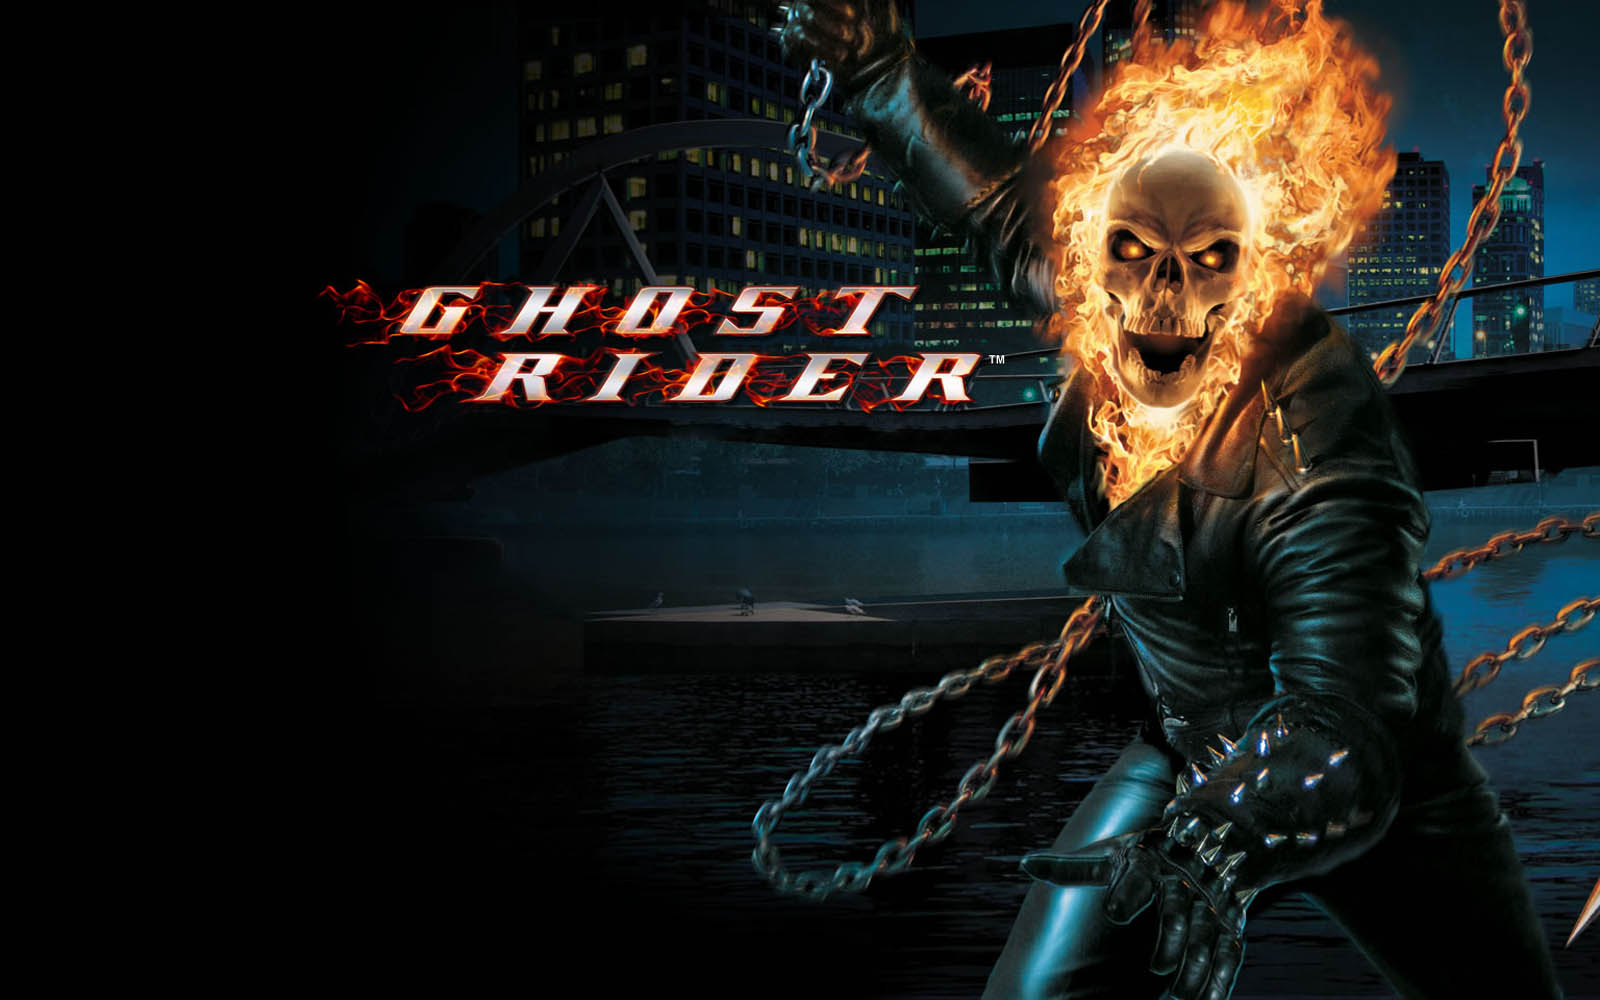 Tag Ghost Rider Wallpapers Images Photos Pictures and Backgrounds 1600x1000